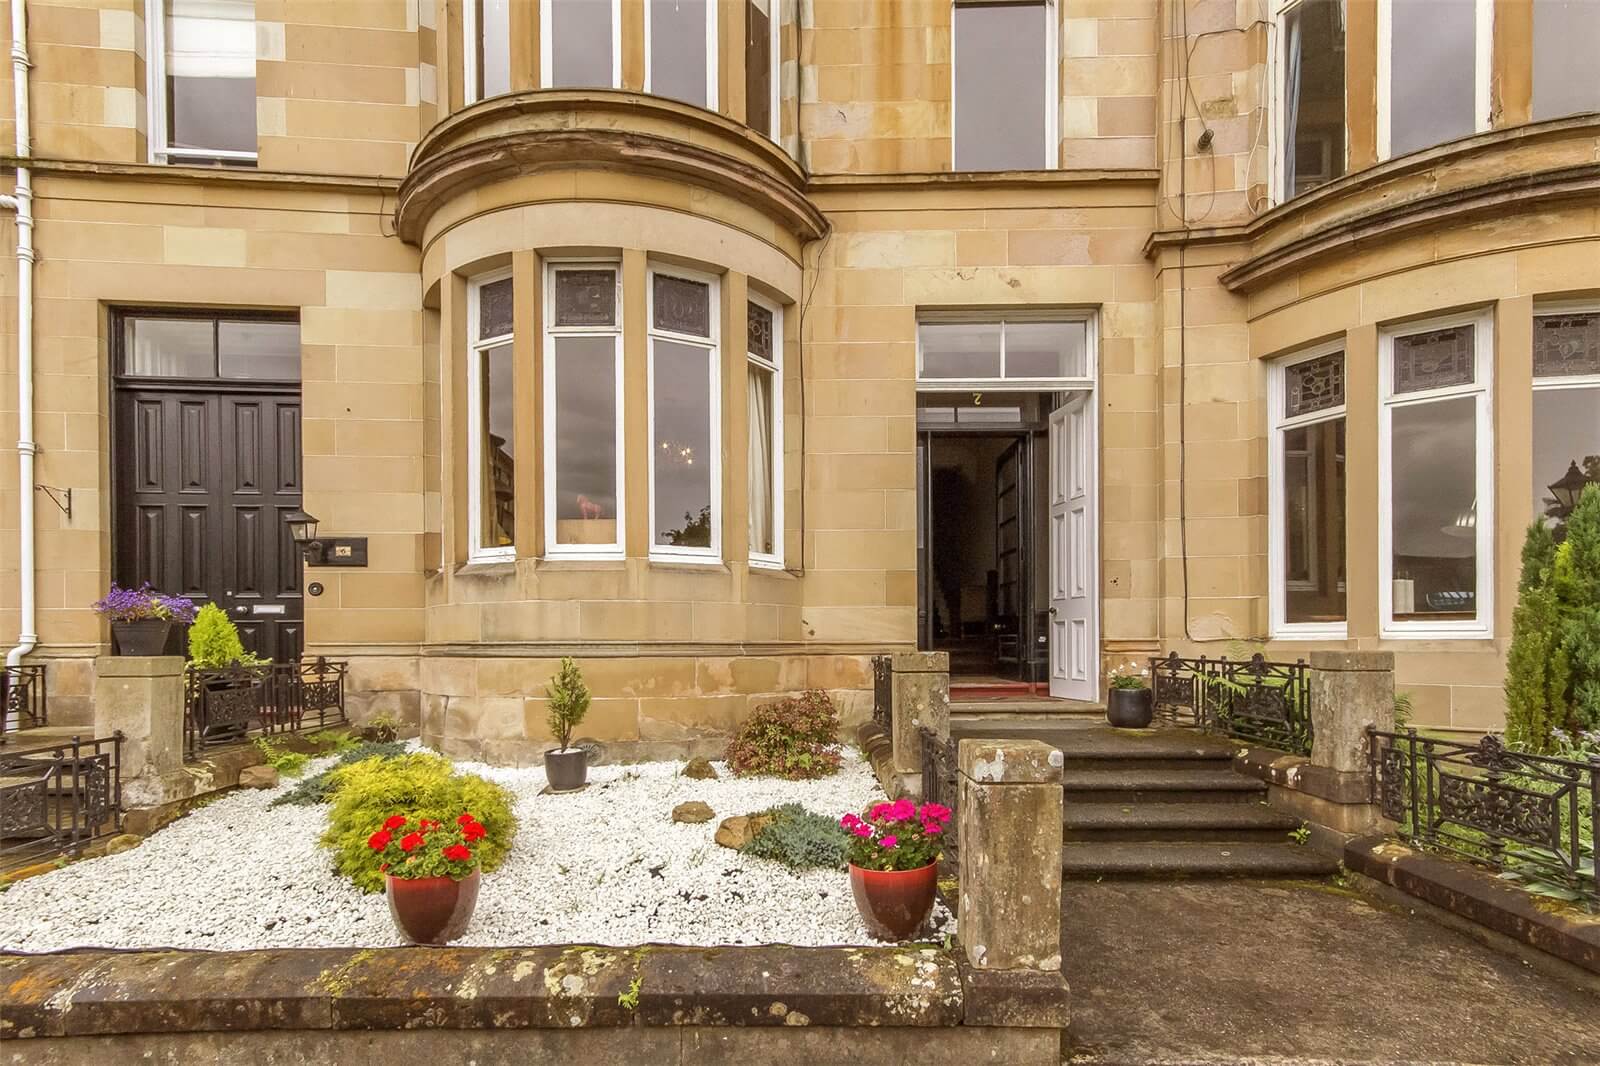 Our latest properties for sale and to let (24th July 2019)